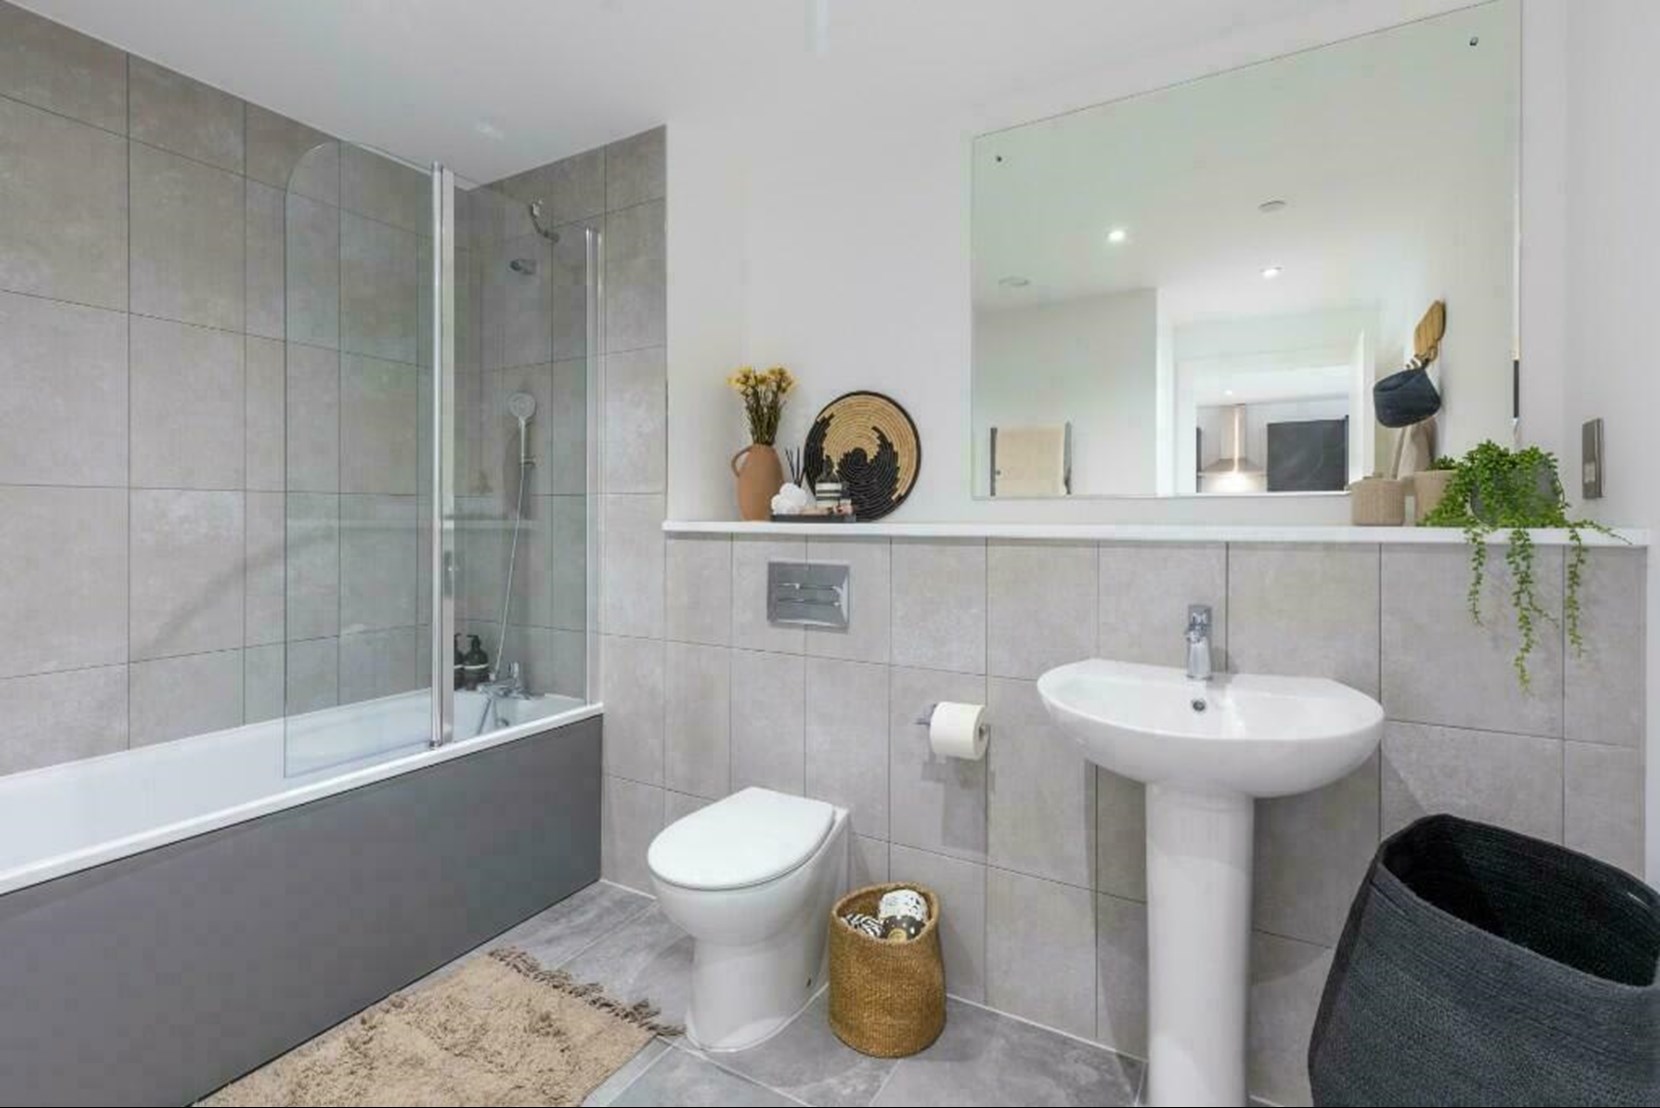 Apartments to Rent by ila at Hairpin House, Birmingham, B12, bathroom